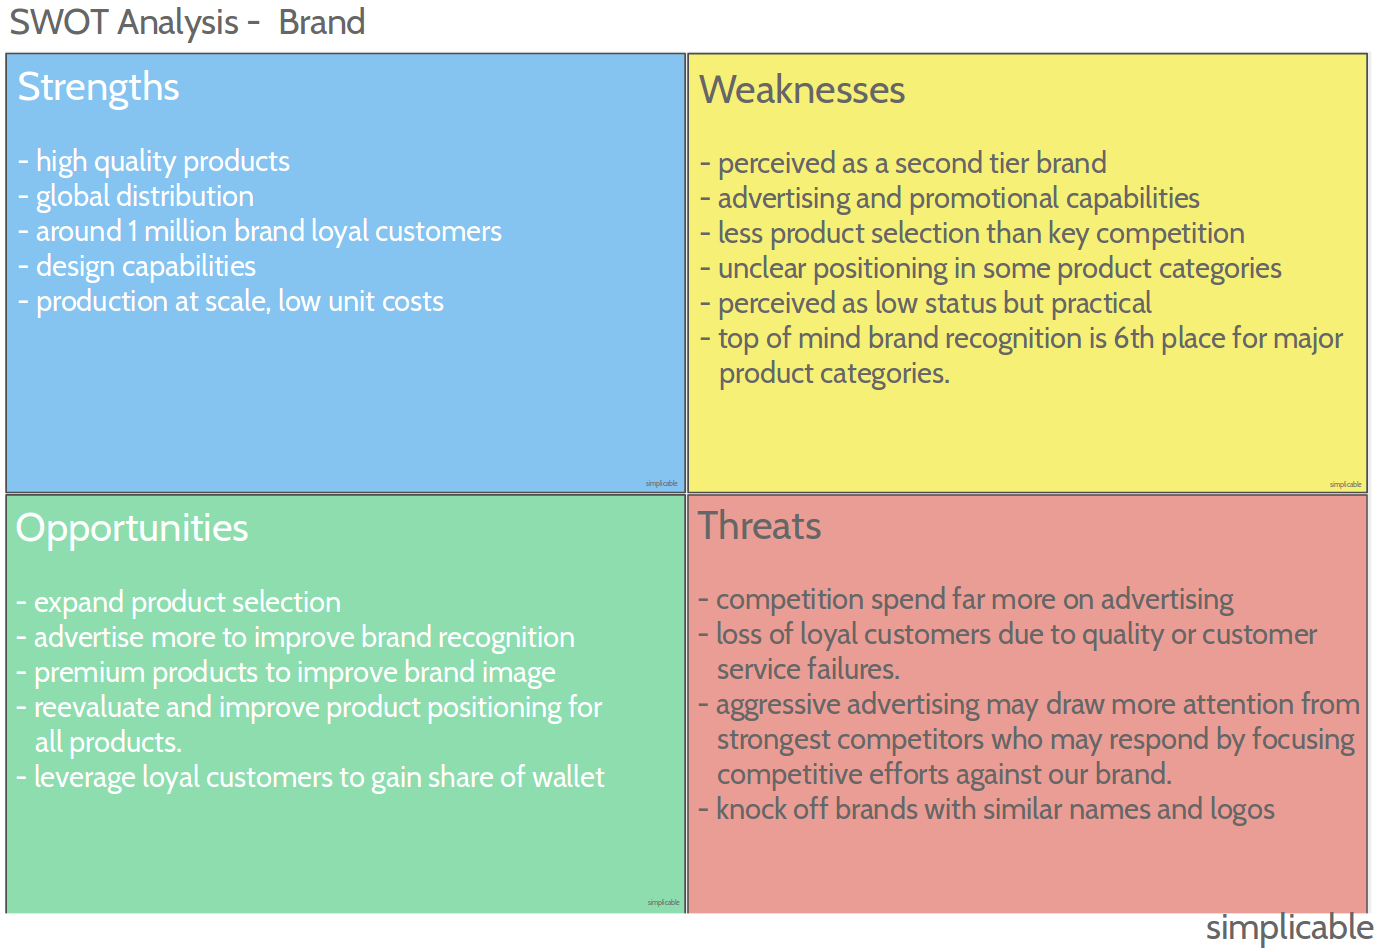 Example of a swot analysis for a sporting goods brand that has high quality products and extensive design capabilities but lags the competition in terms of advertising and product selection.